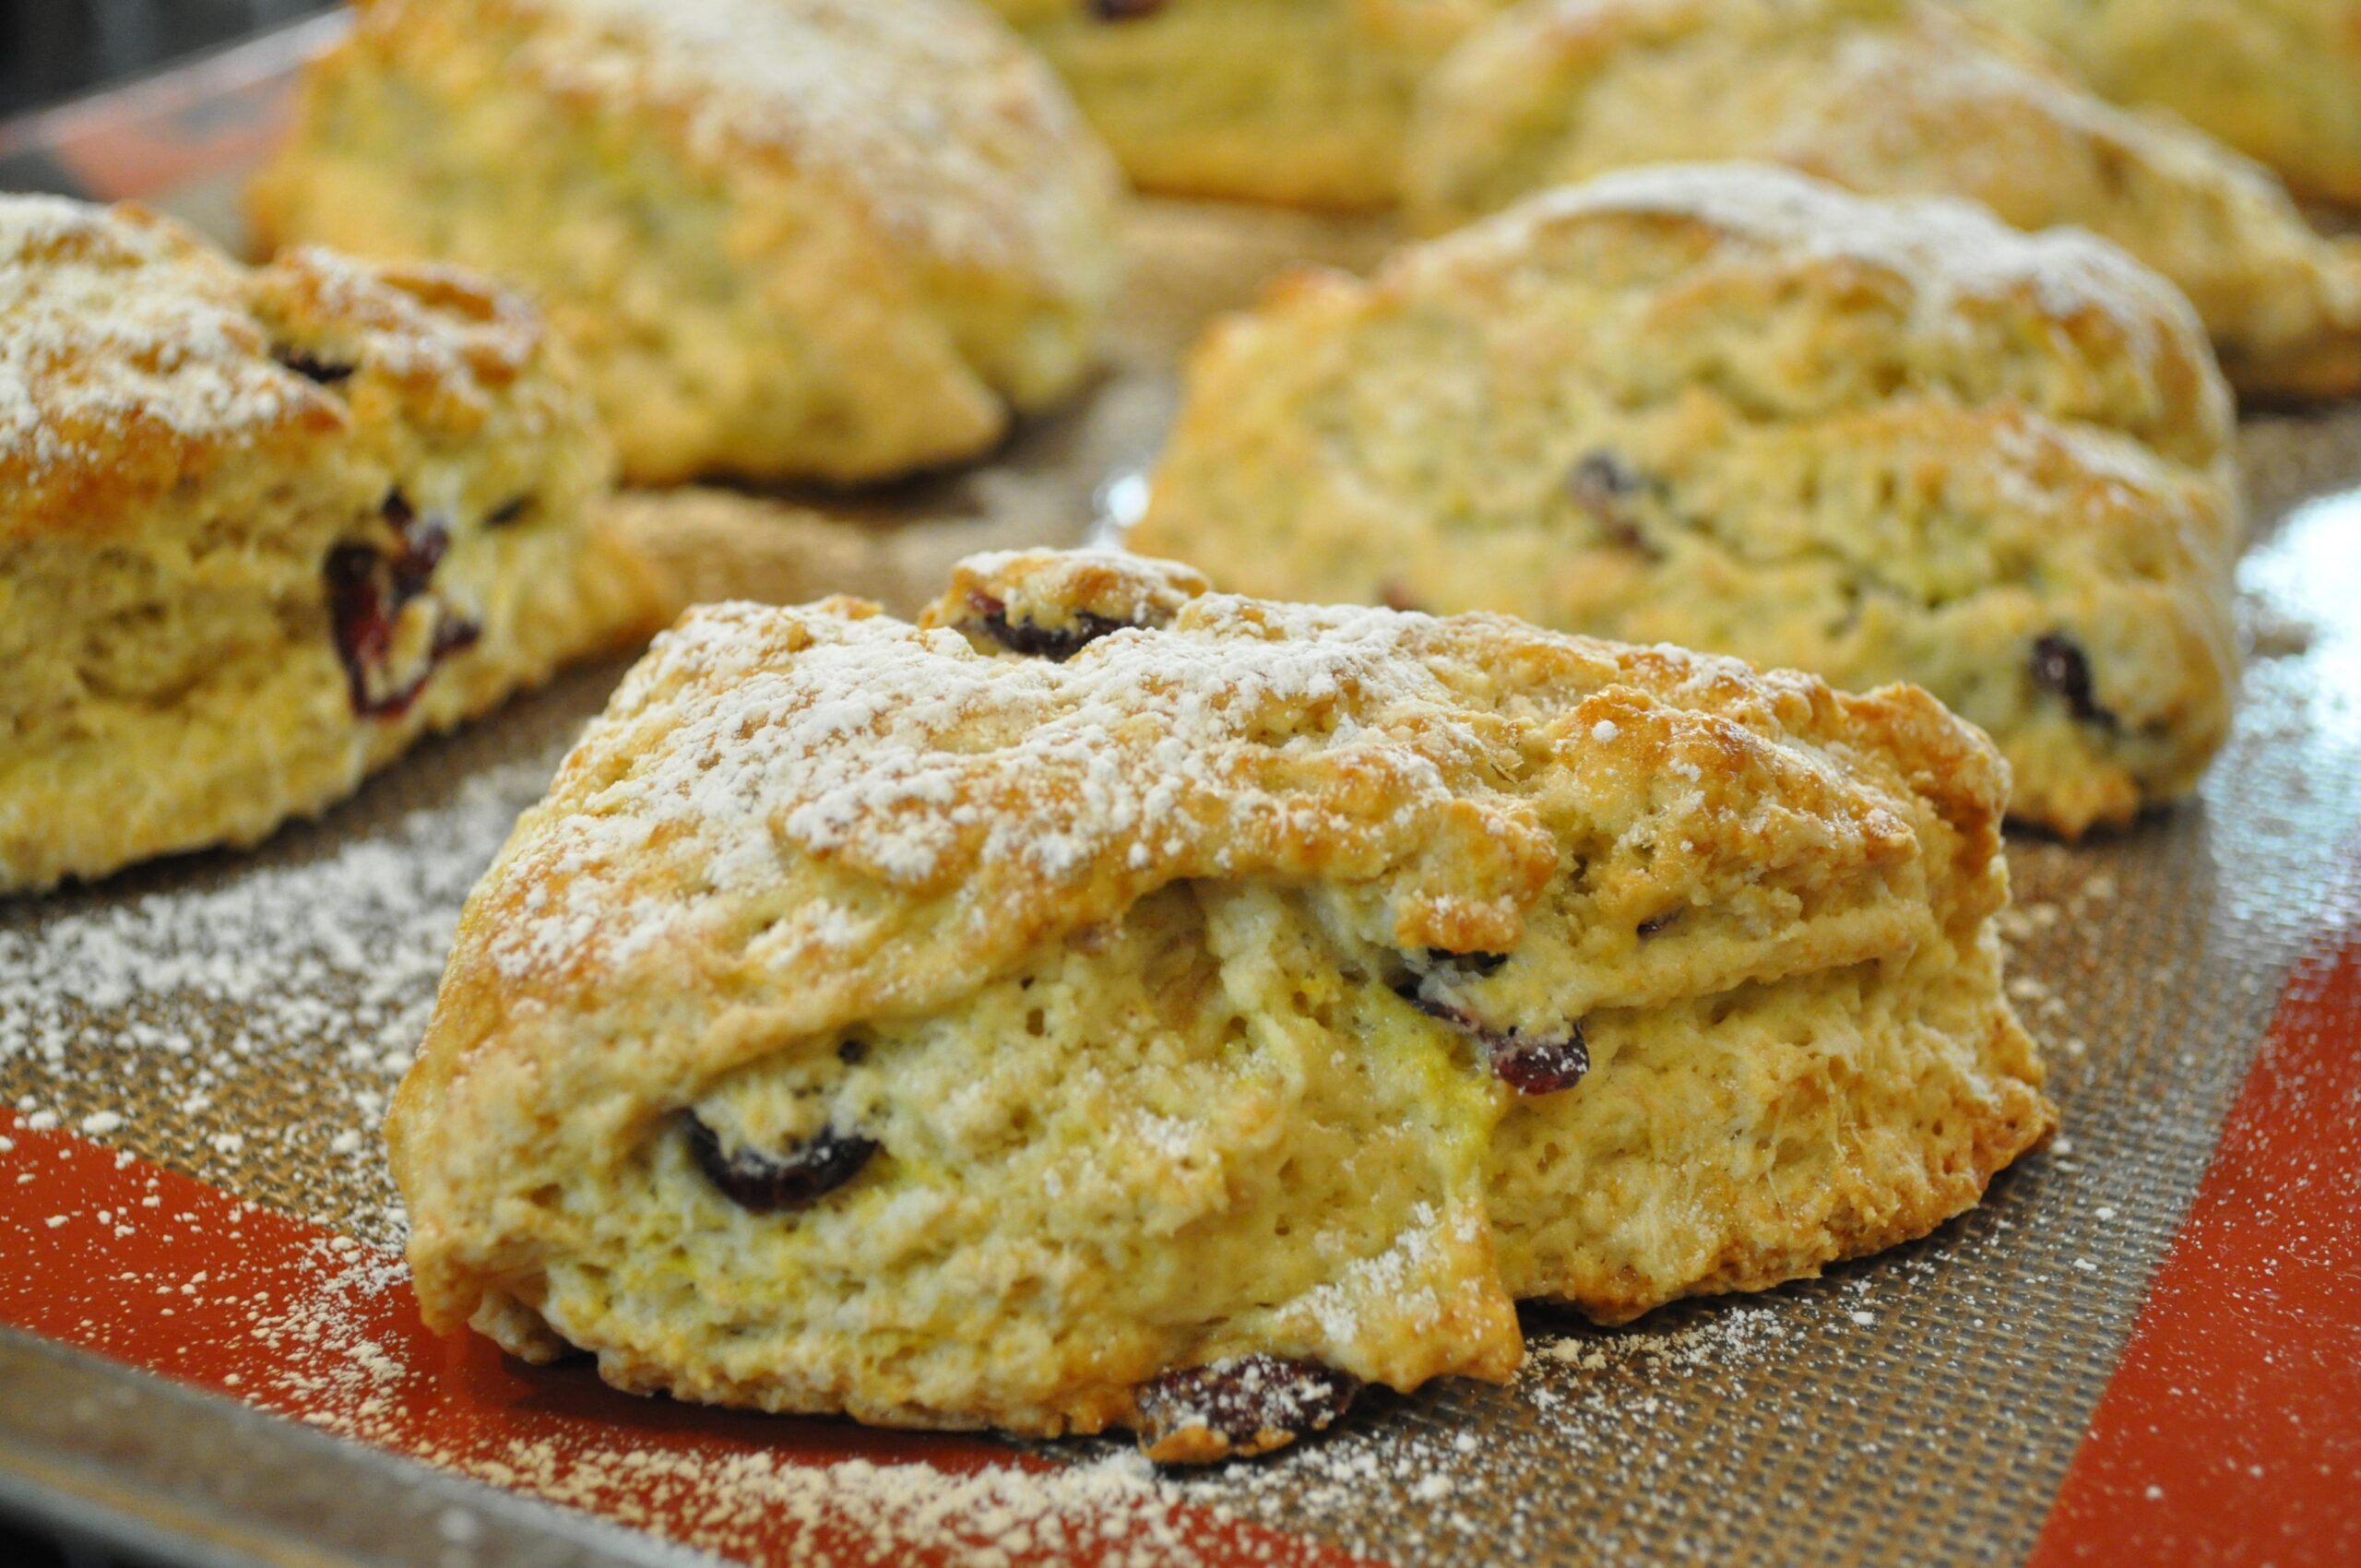  Get your bake on with these cozy, comforting Irish Cran Oat Scones.